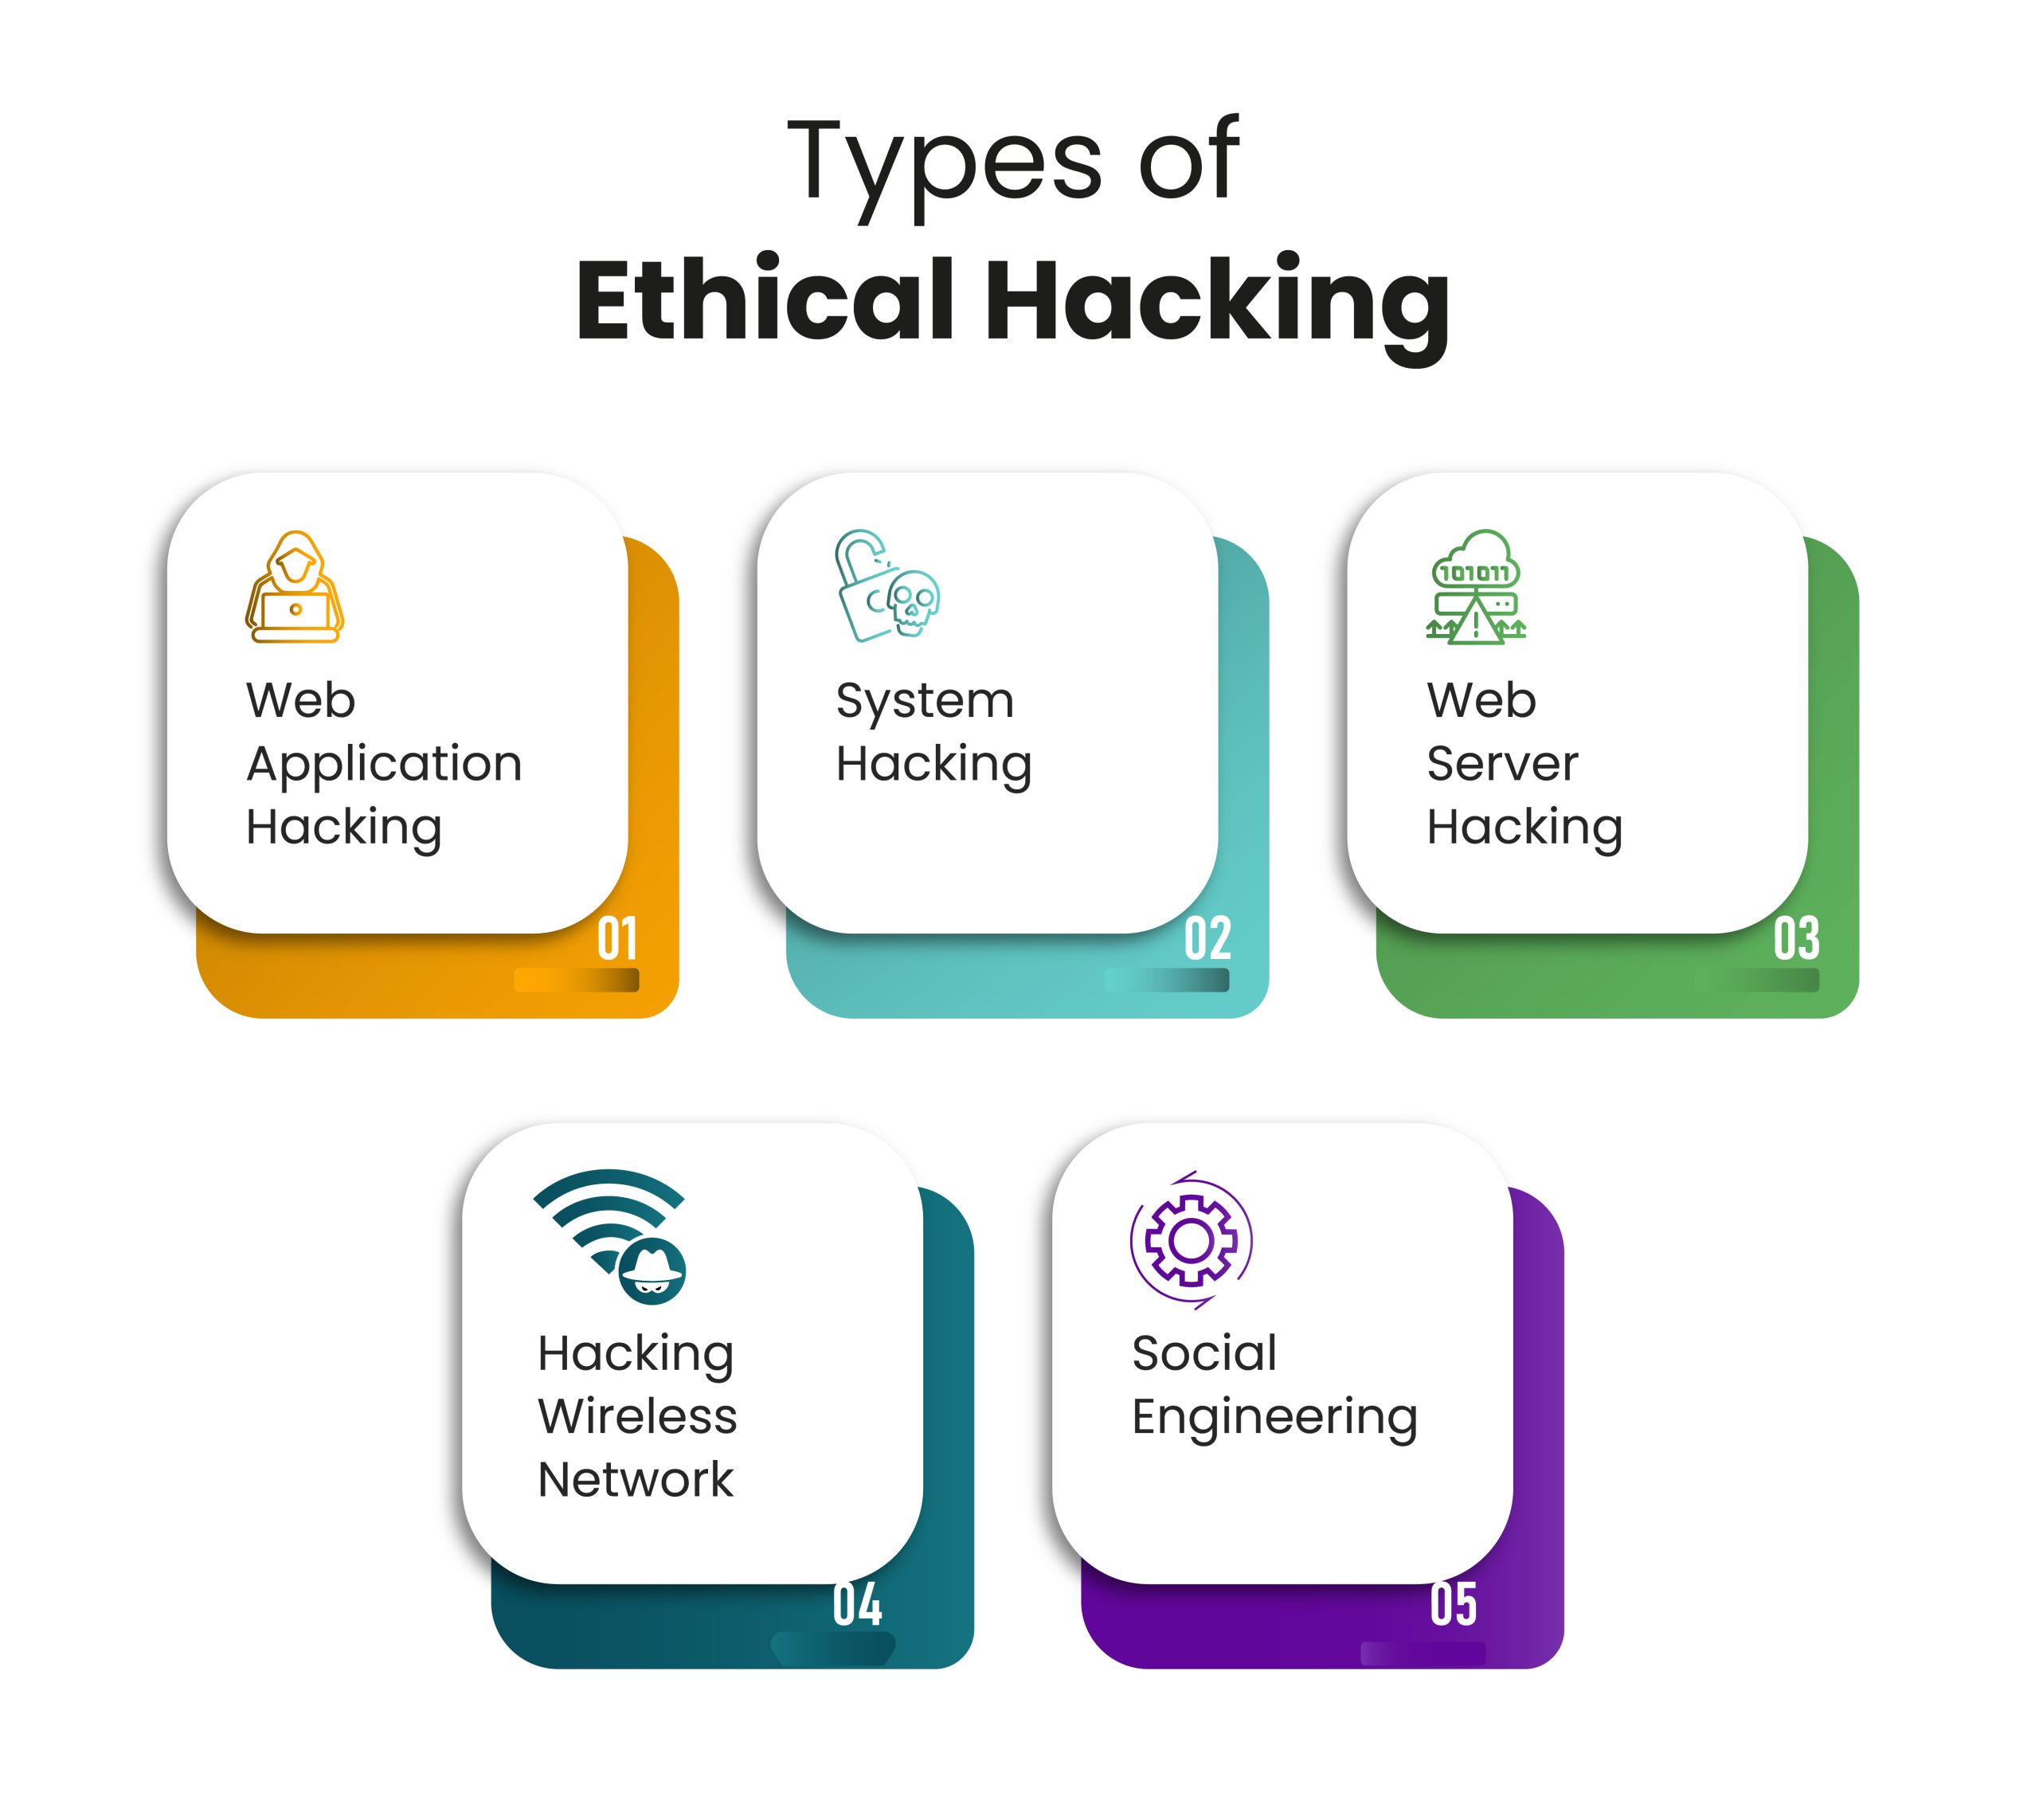 ethical hacking paper presentation